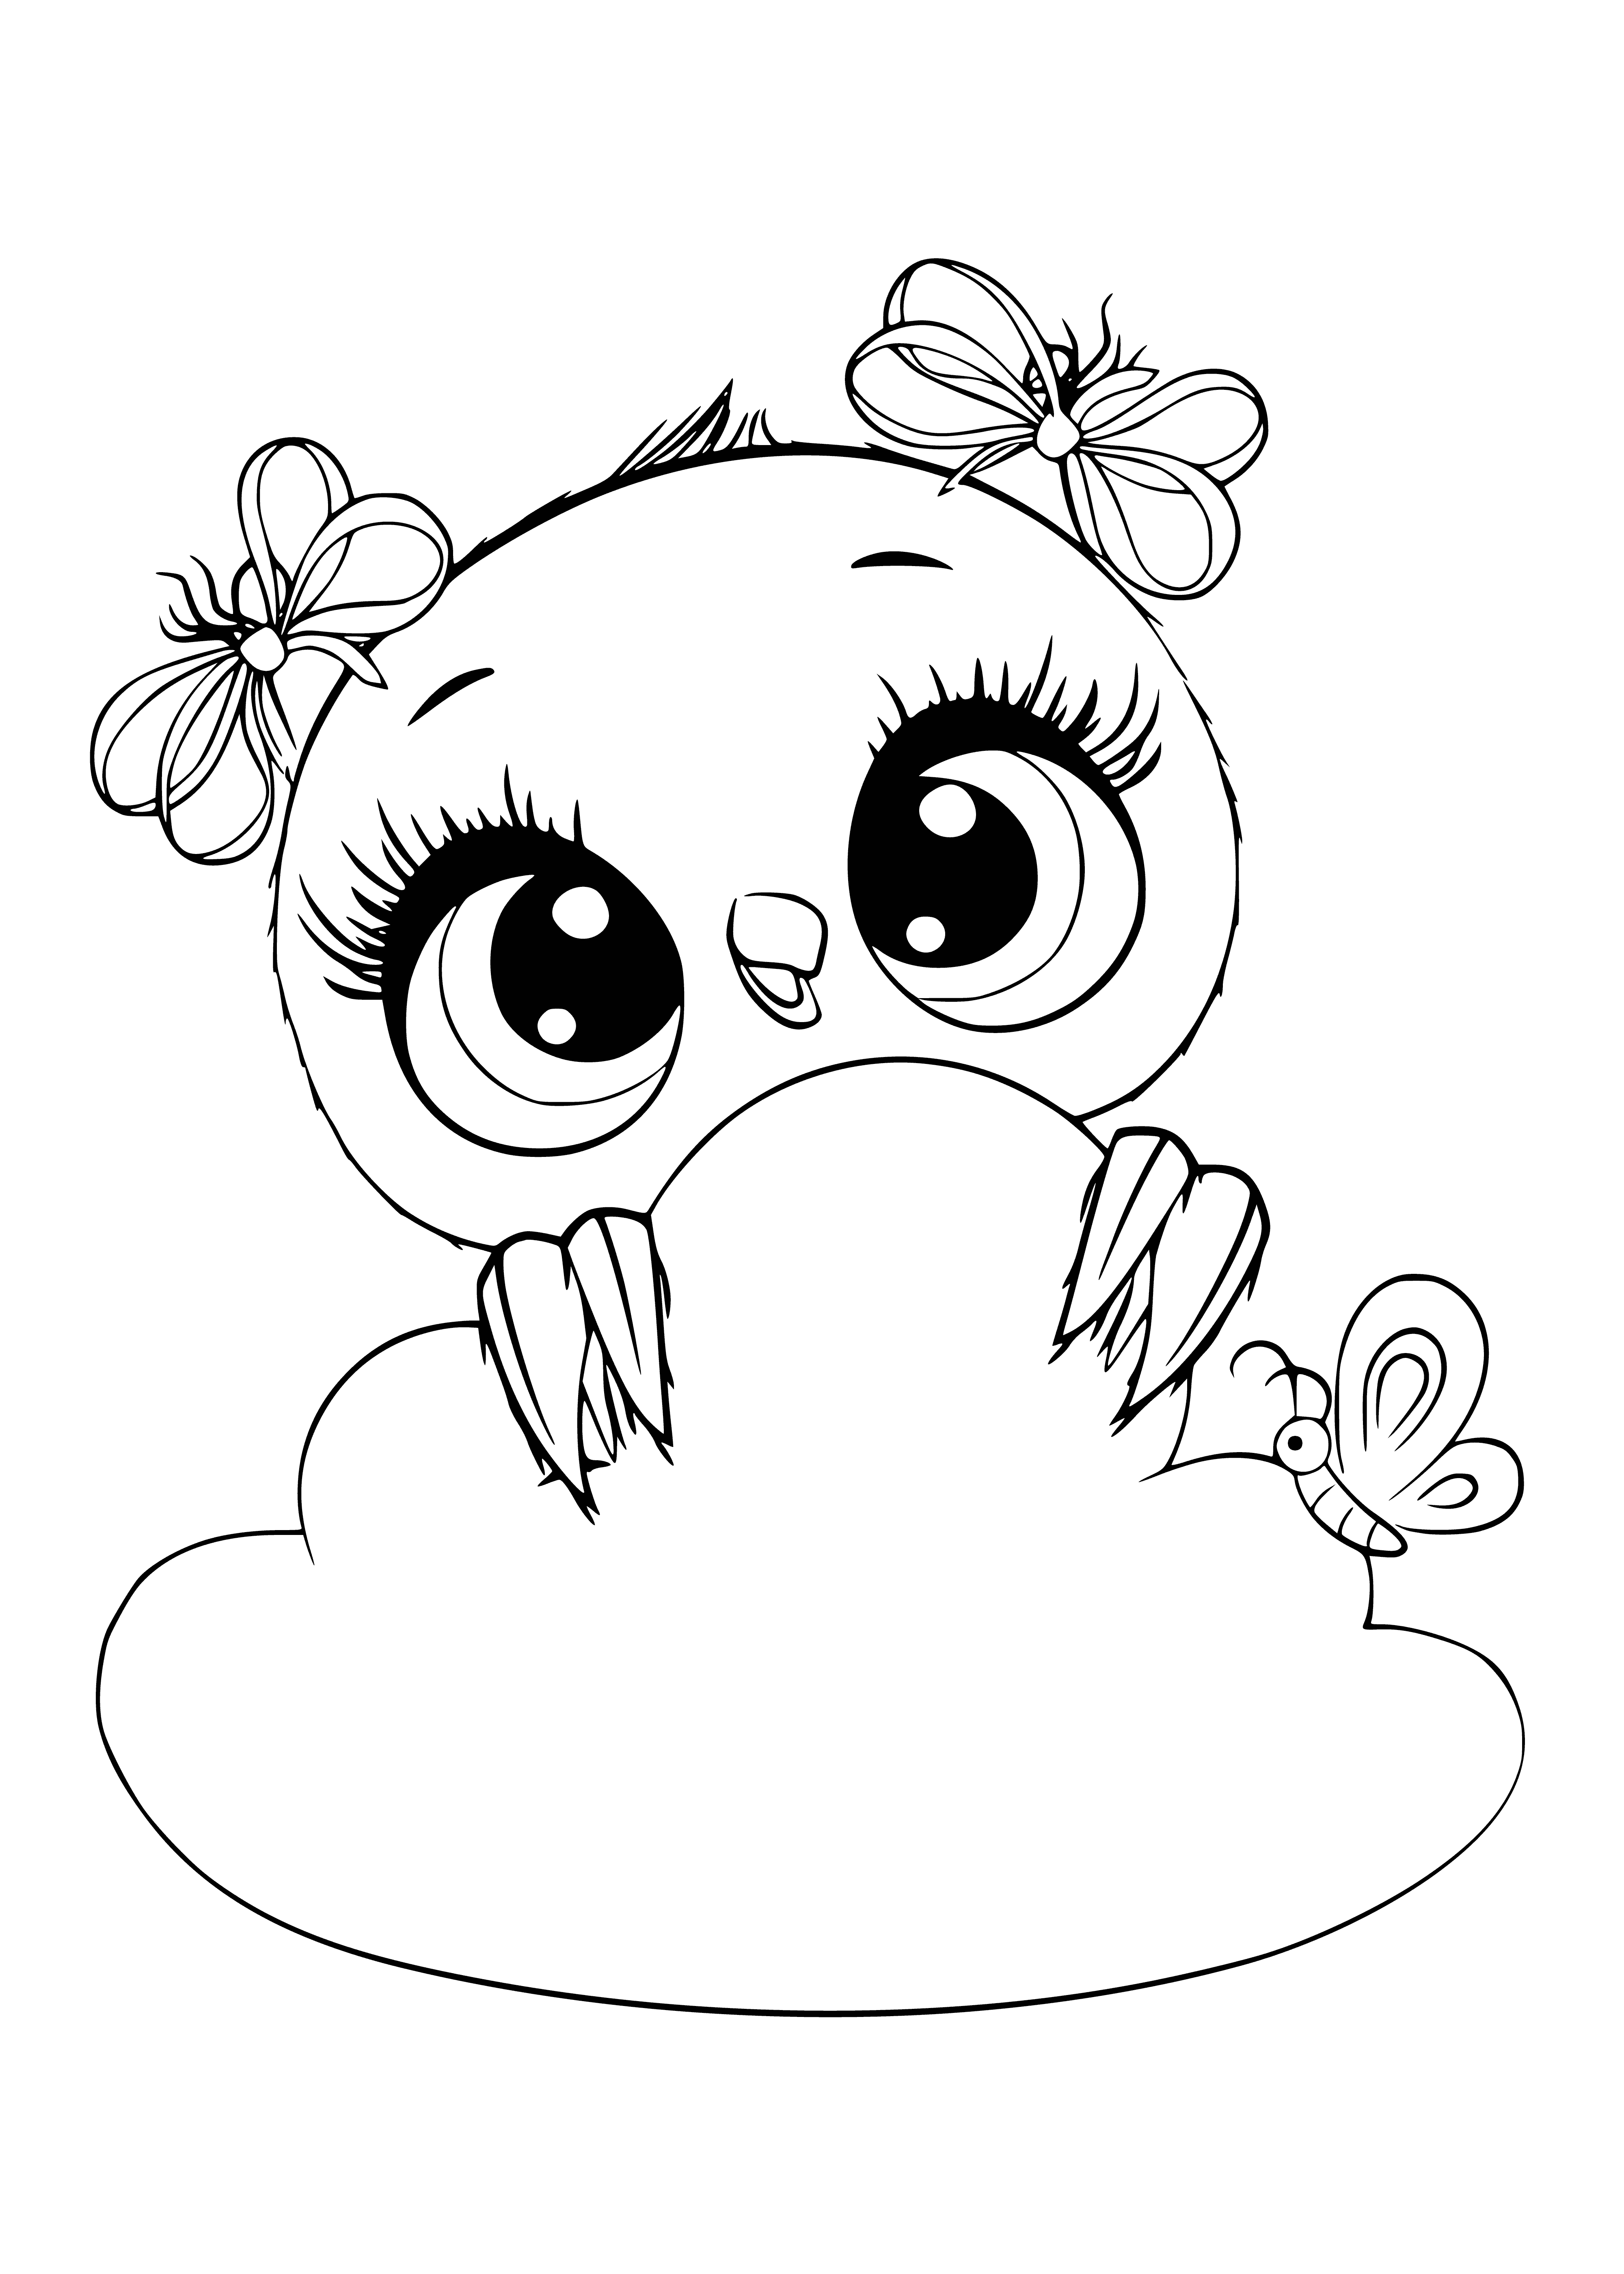 coloring page: A cute chicken smiles atop a fluffy white cloud in a pastel sky. Coloring this page brings out a feeling of peace and happiness.